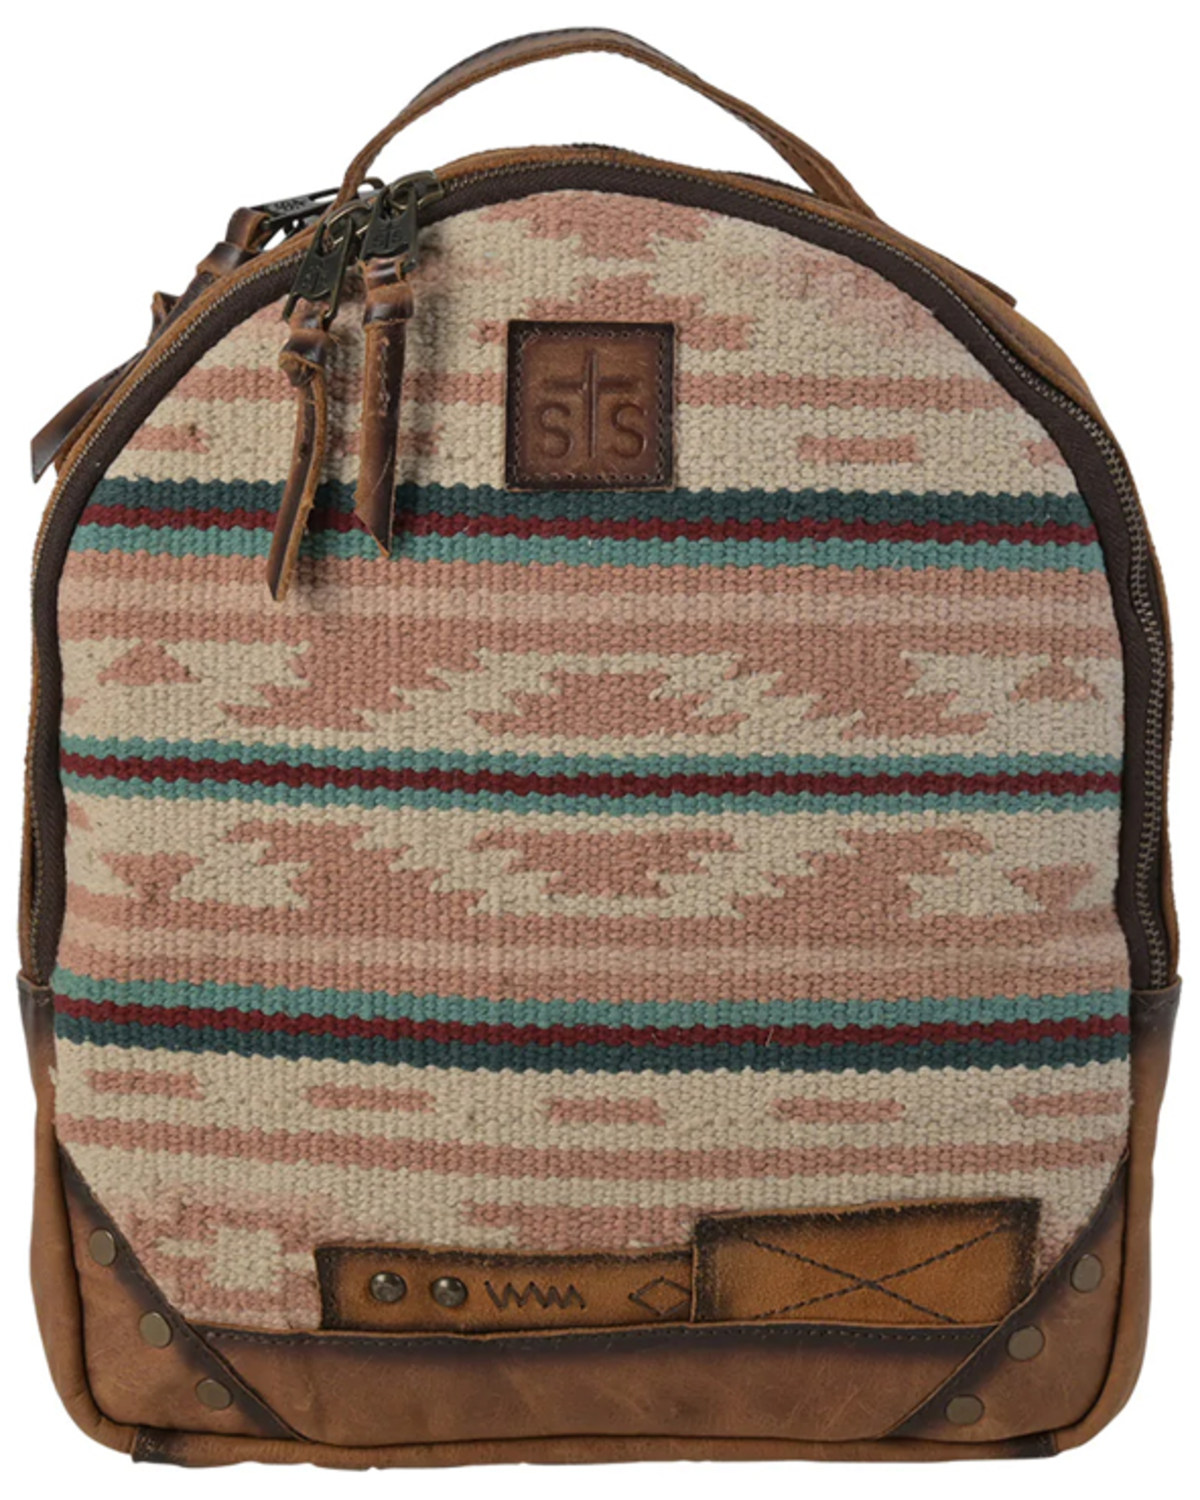 STS Ranchwear By Carroll Women's Palomino Serape Concealed Carry Mini Backpack